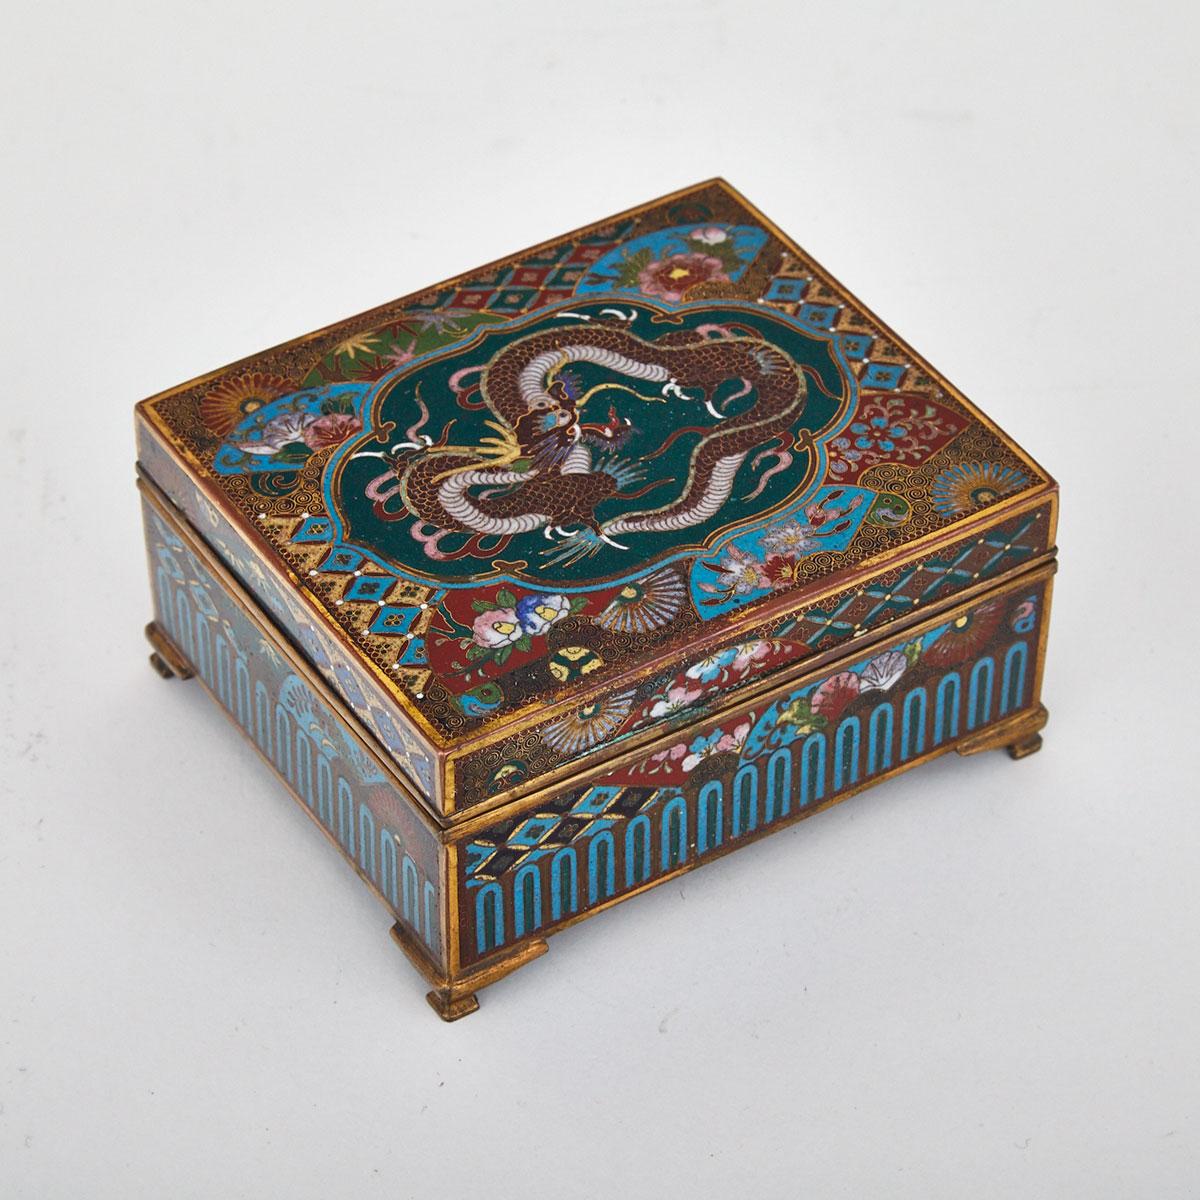 Cloisonné Enamel Dragon Box and Cover, Japan, Early 20th Century